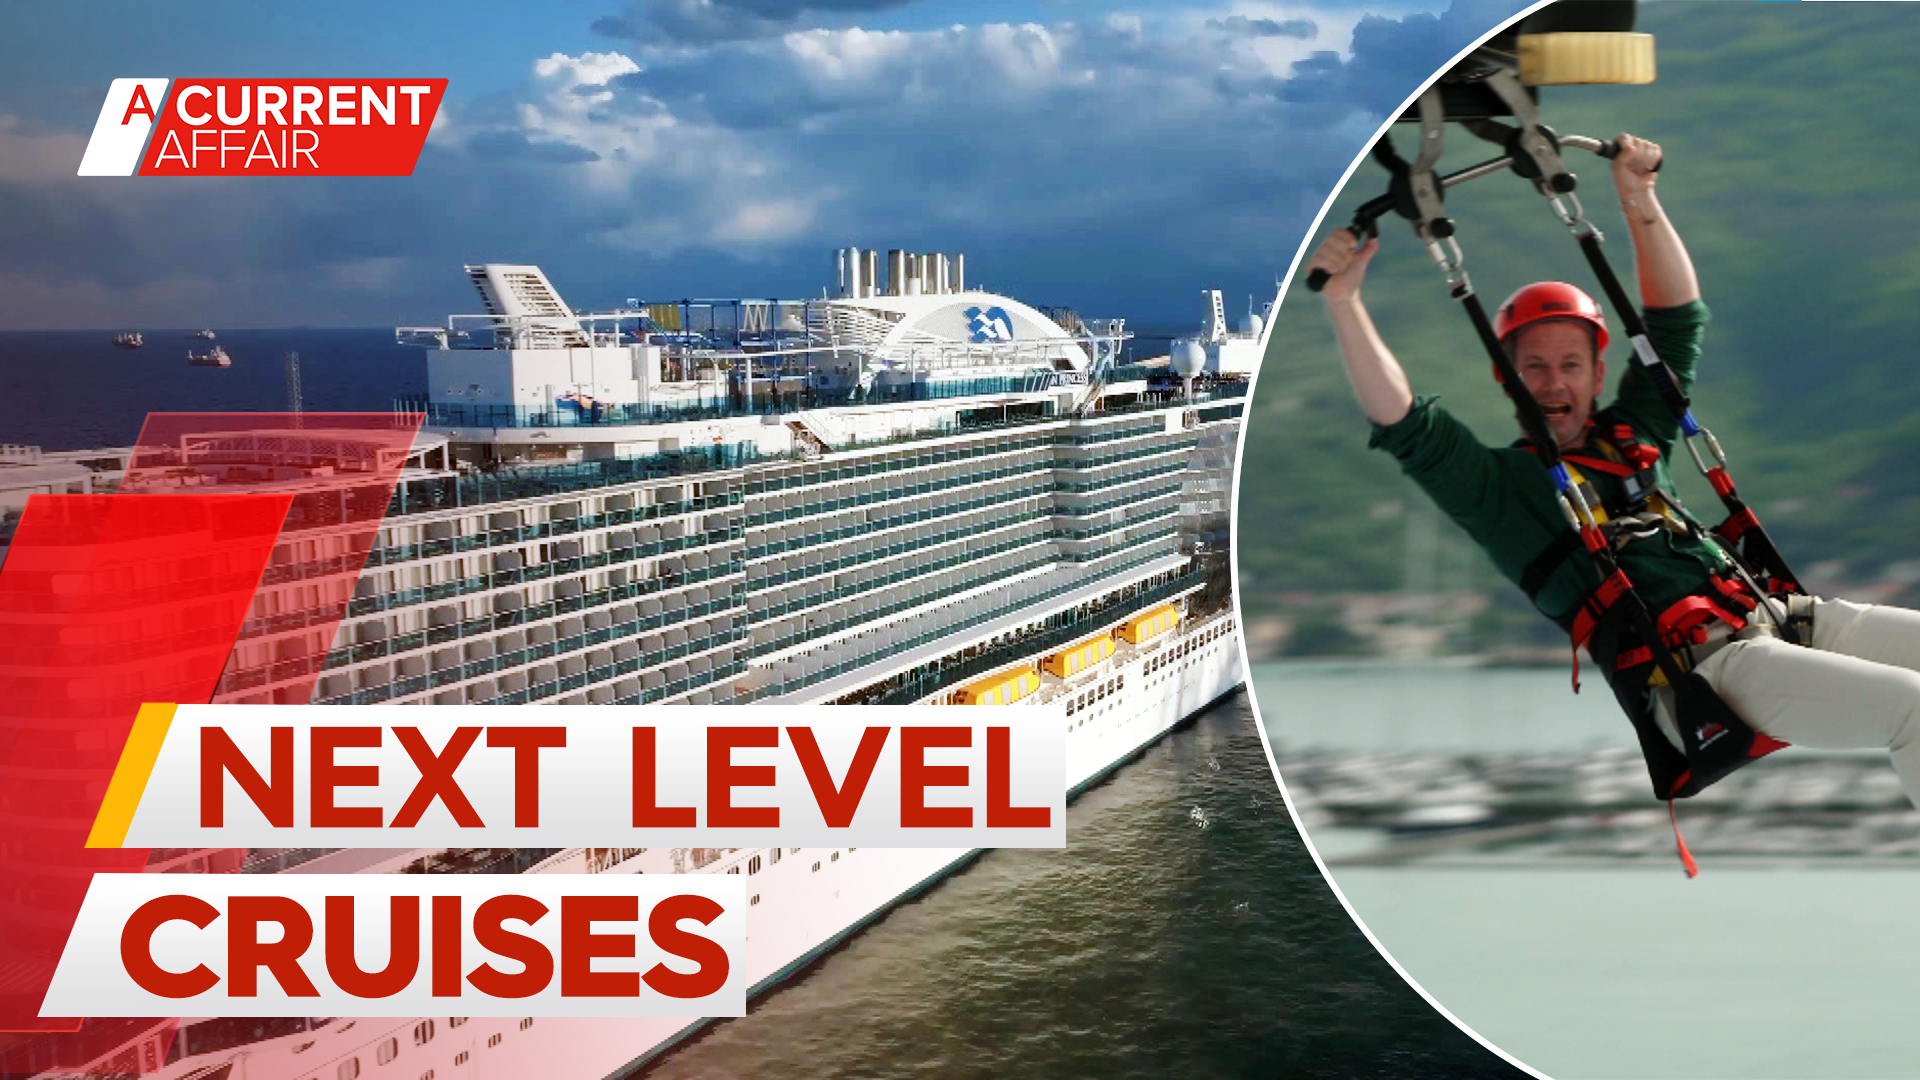 Aboard the new cruise liner taking affordable luxury to a whole new level